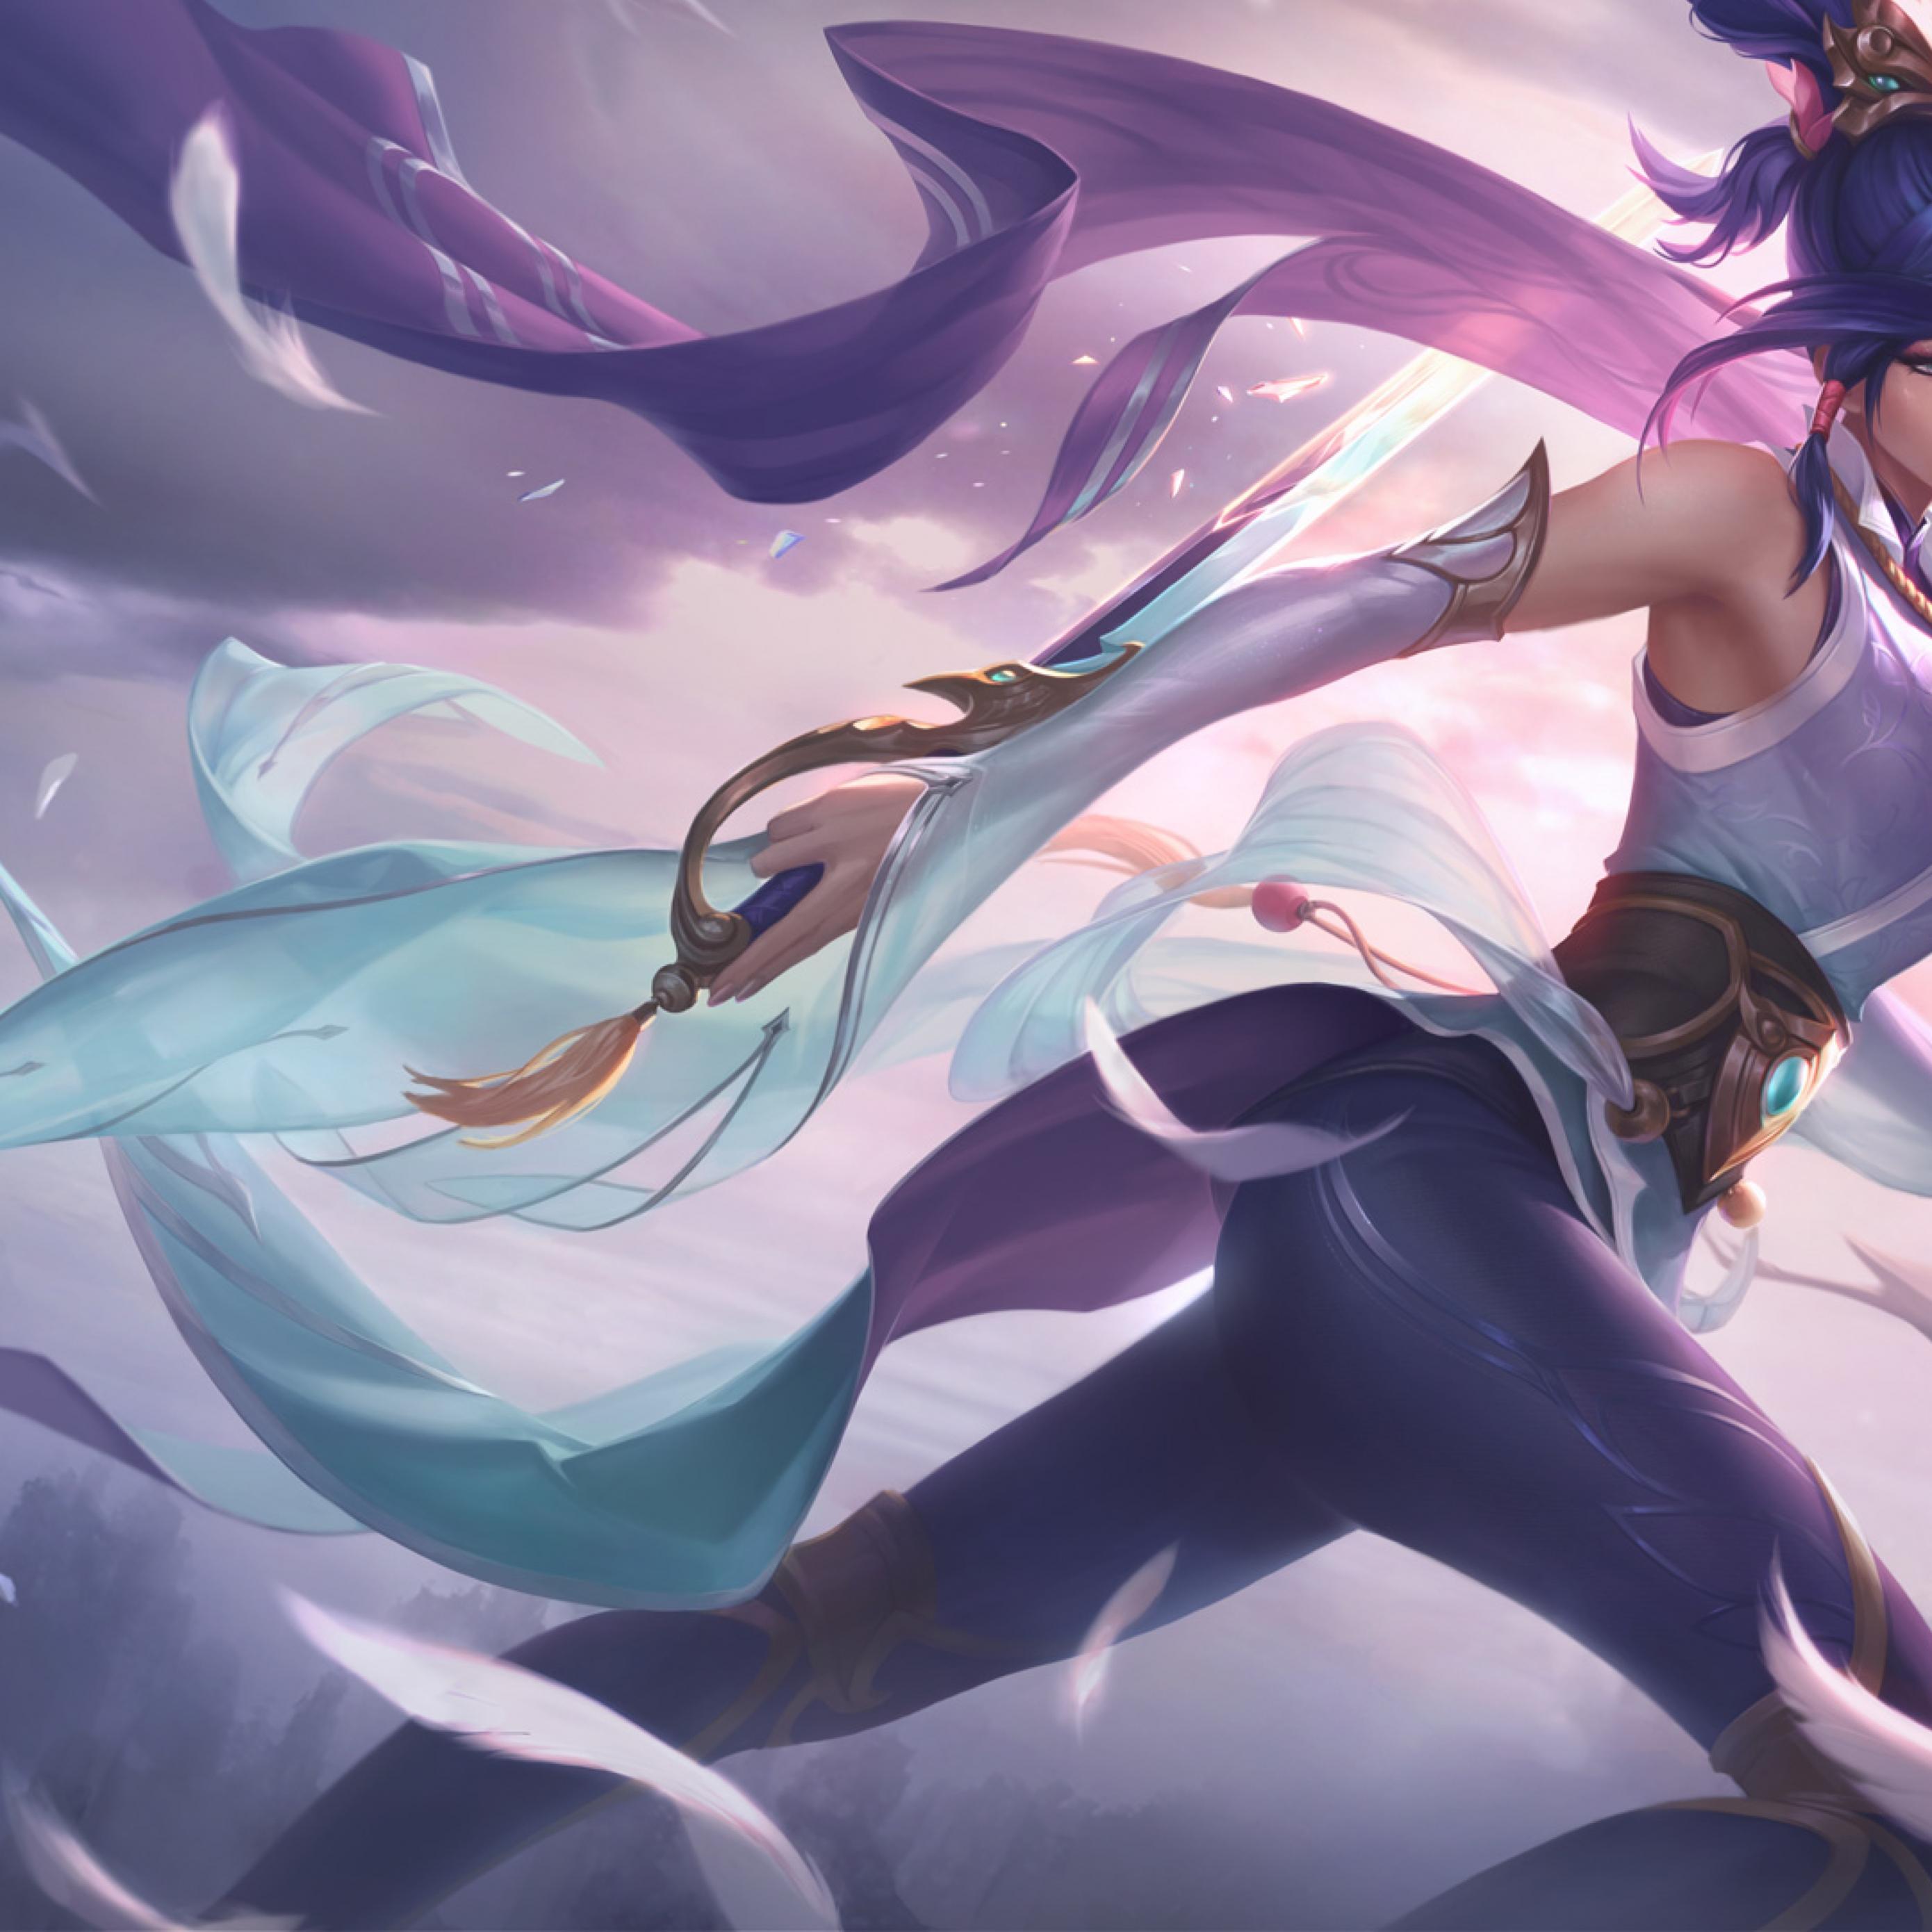 Download Fiora League Of Legends Apple iPad Air wallpapers 2780x2780